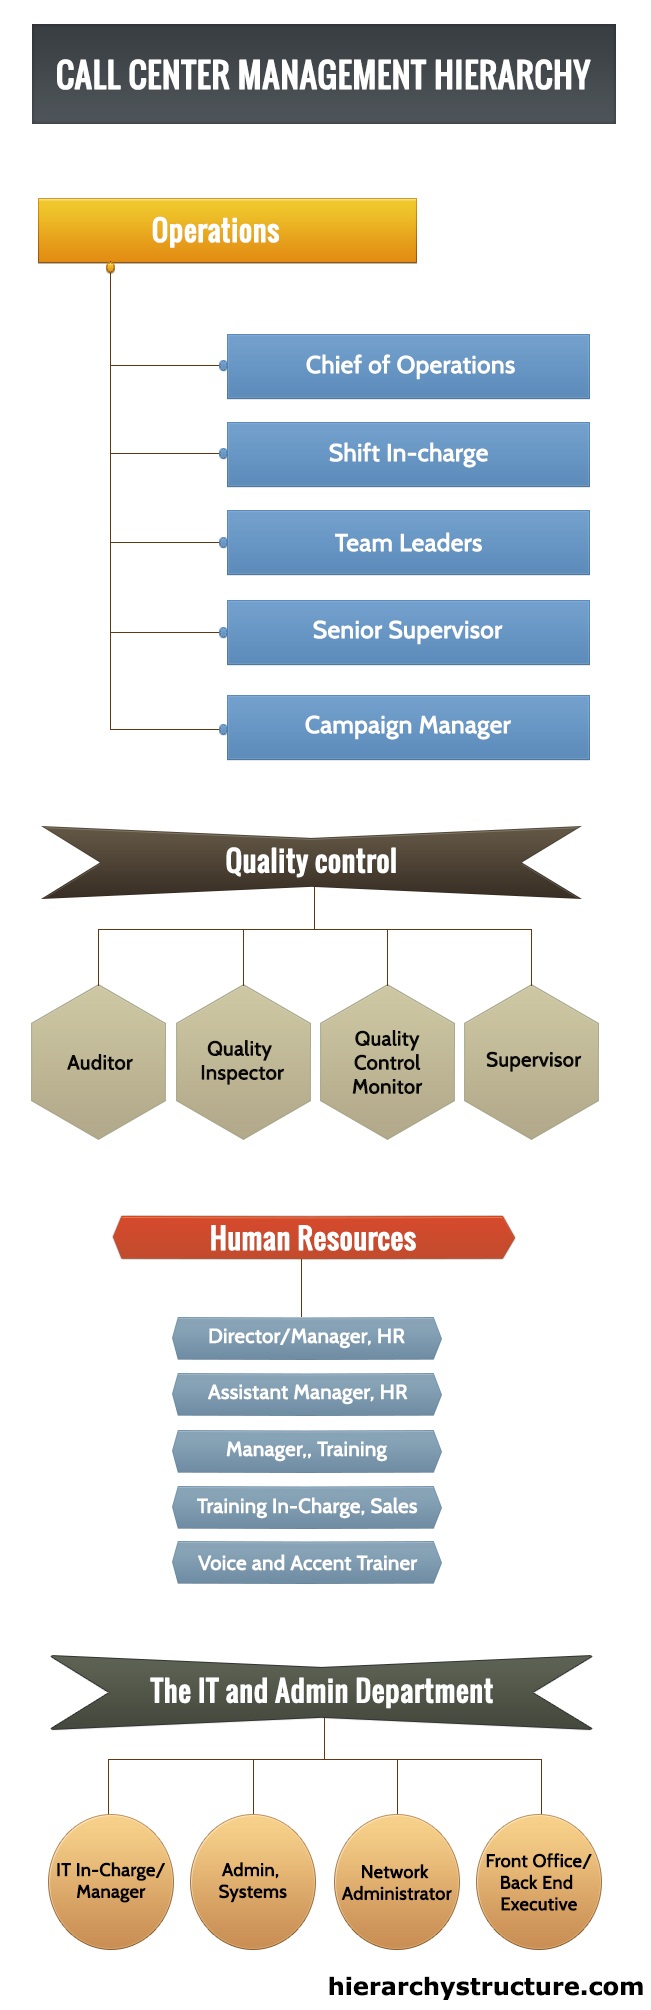 Call Center Management Hierarchy